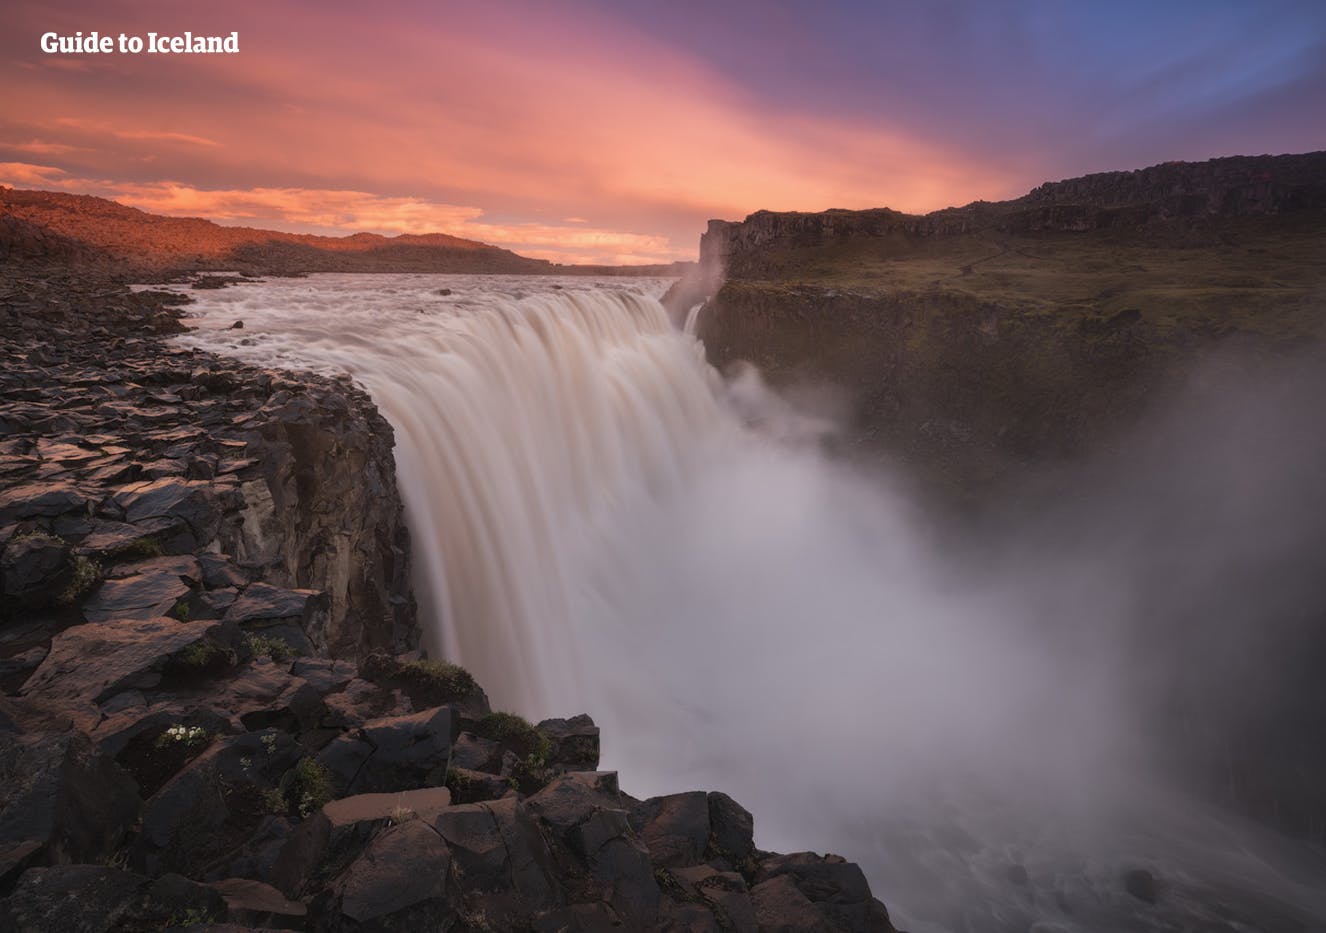 Dettifoss Waterfall in the North of Iceland.